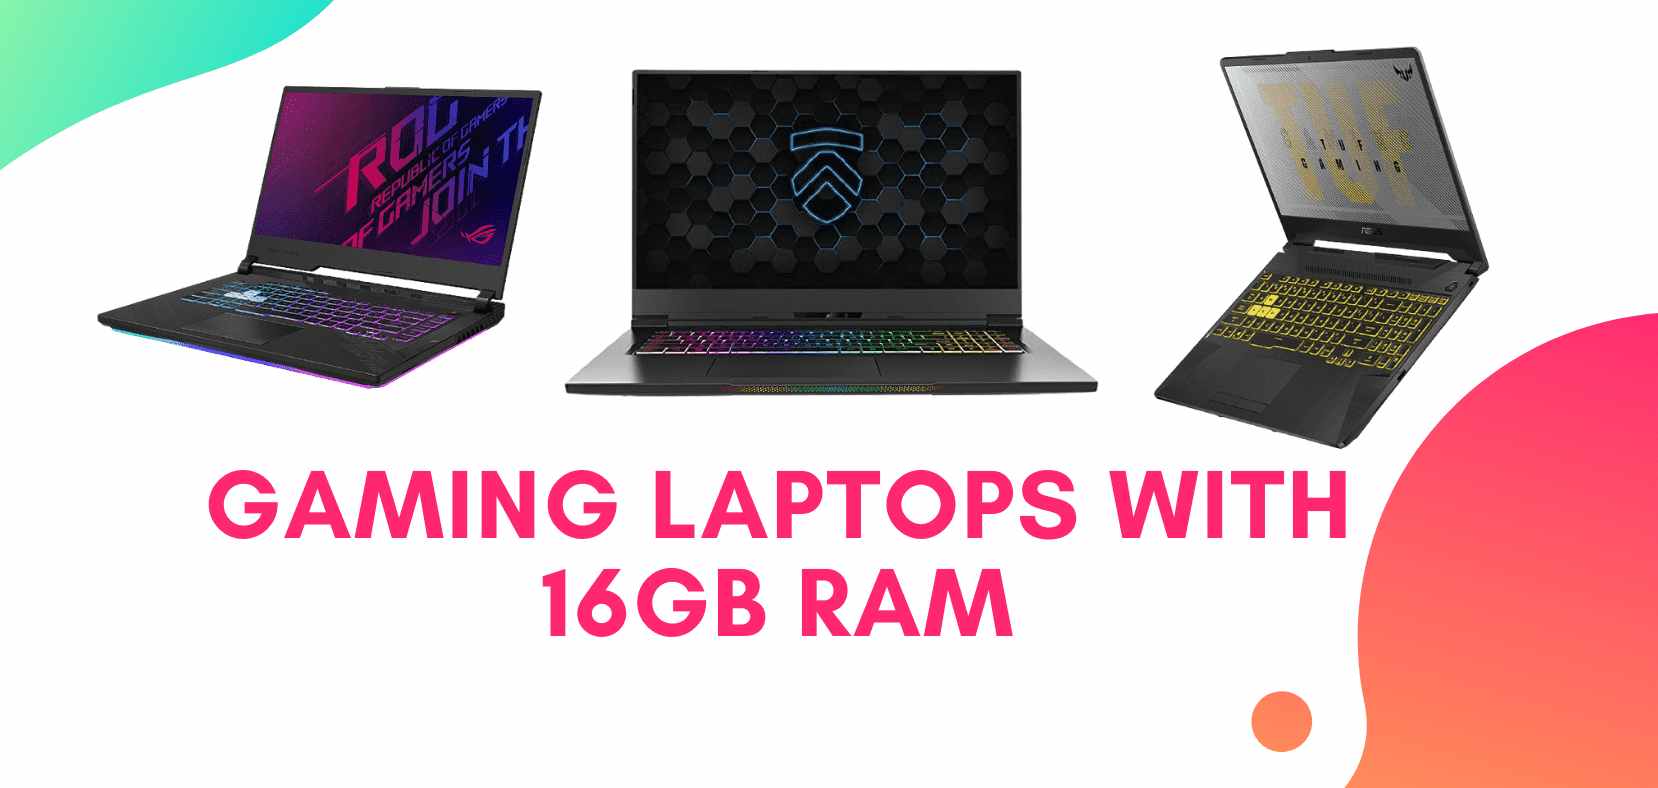 Best Gaming Laptops With 16GB RAM